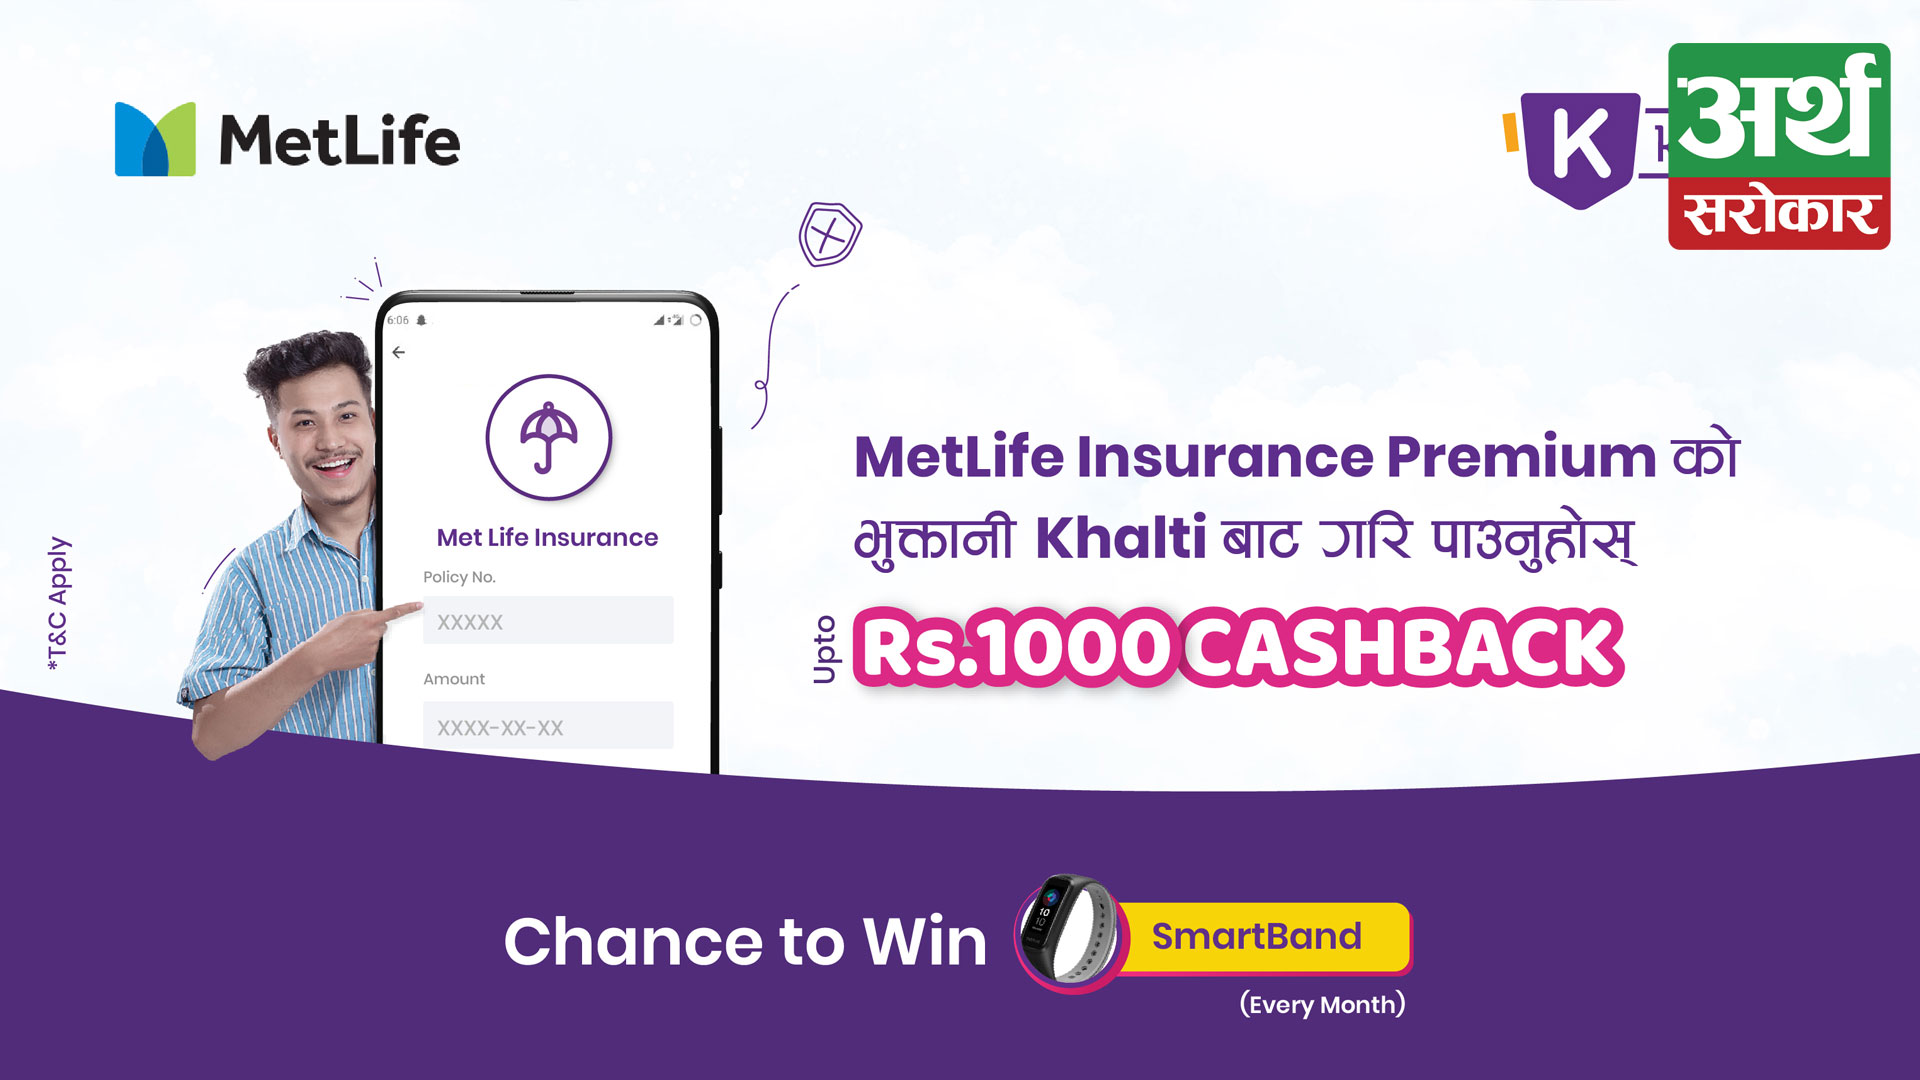 Get up to Rs. 1,000 cashback on MetLife Insurance Payment through Khalti